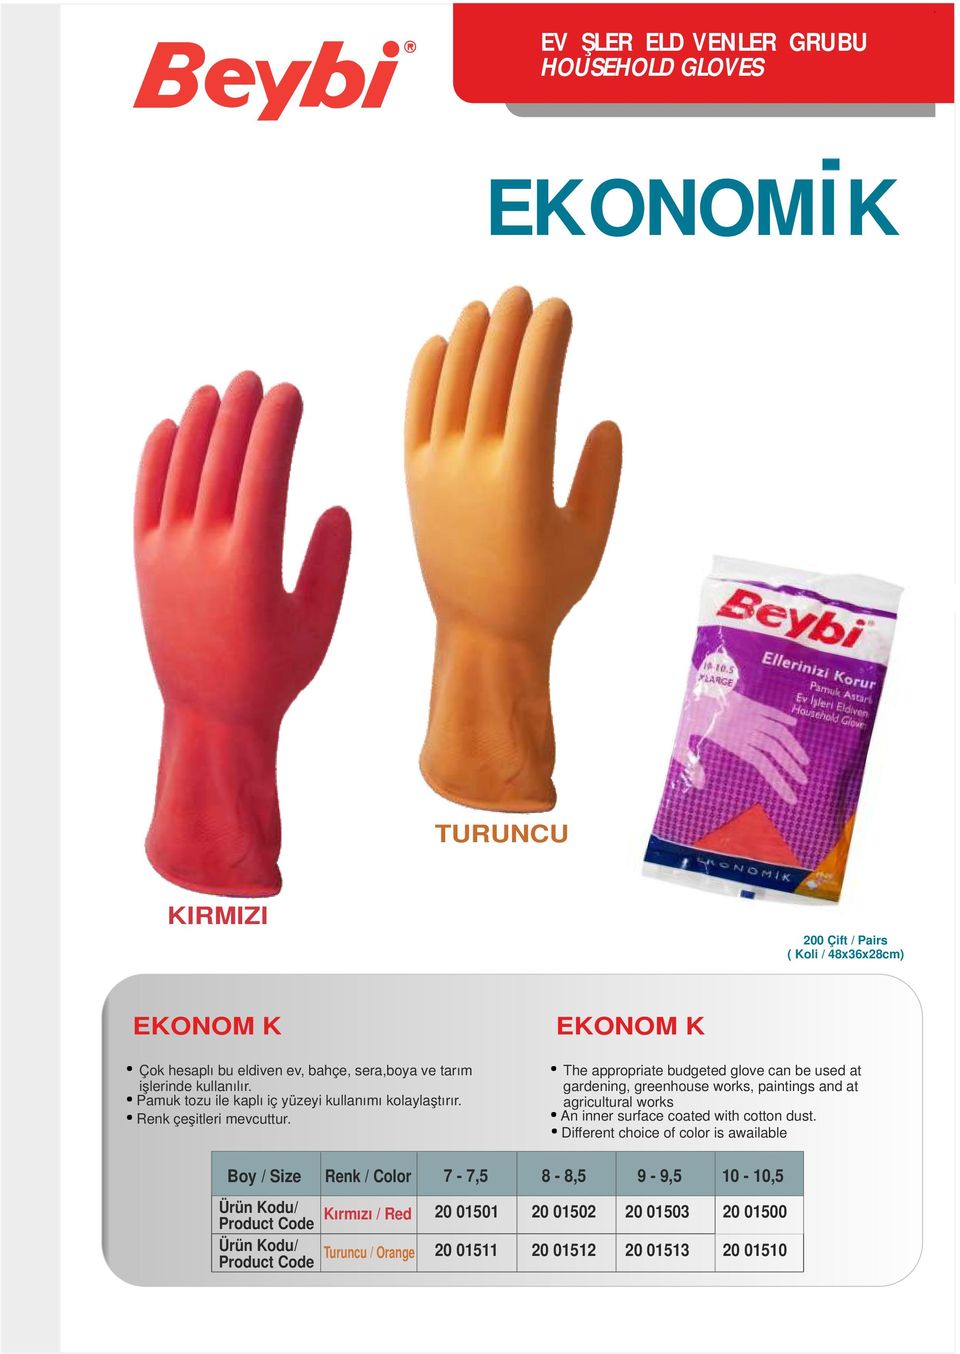 EKONOMİK The appropriate budgeted glove can be used at gardening, greenhouse works, paintings and at agricultural works An inner surface coated with cotton